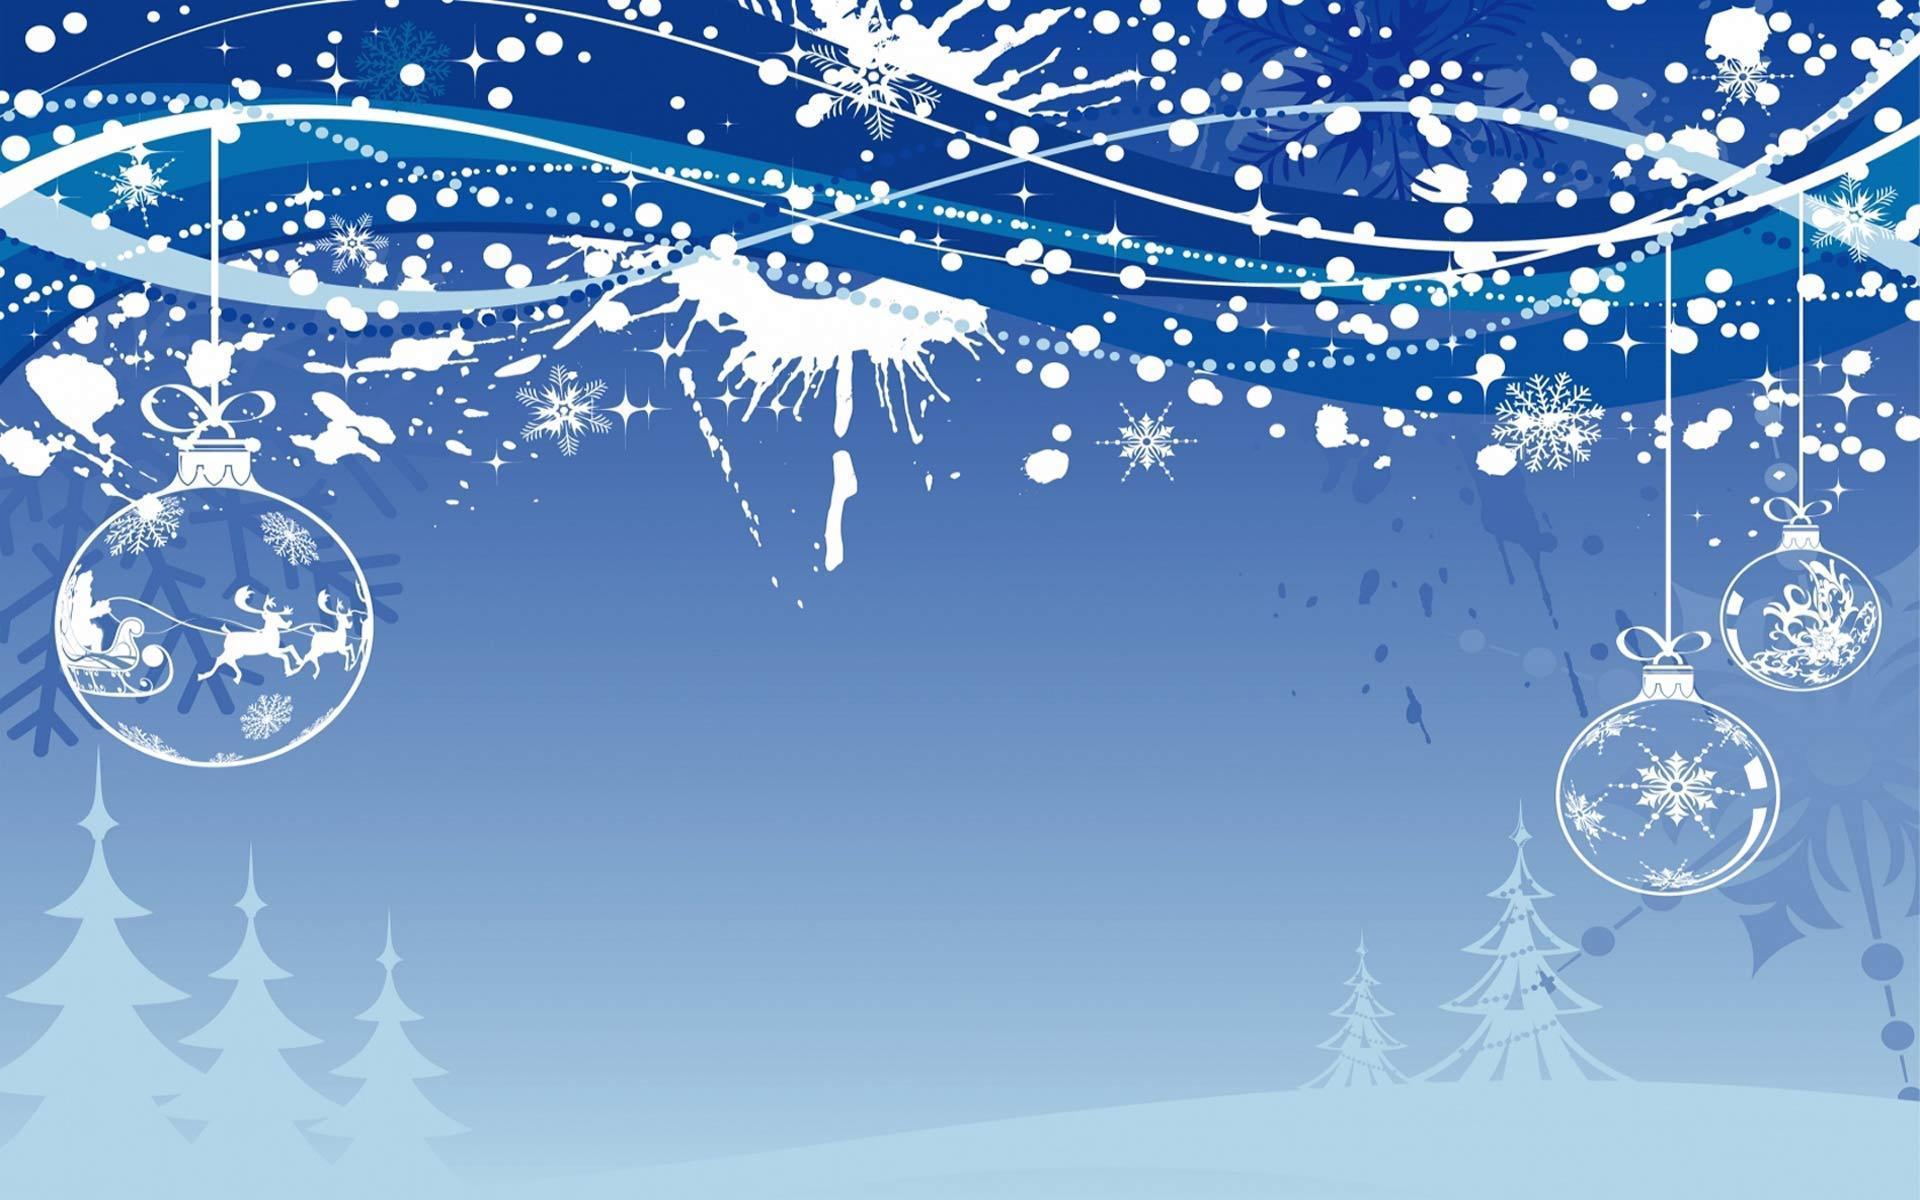 Free Christmas Wallpaper for Desktop HD Background Download With